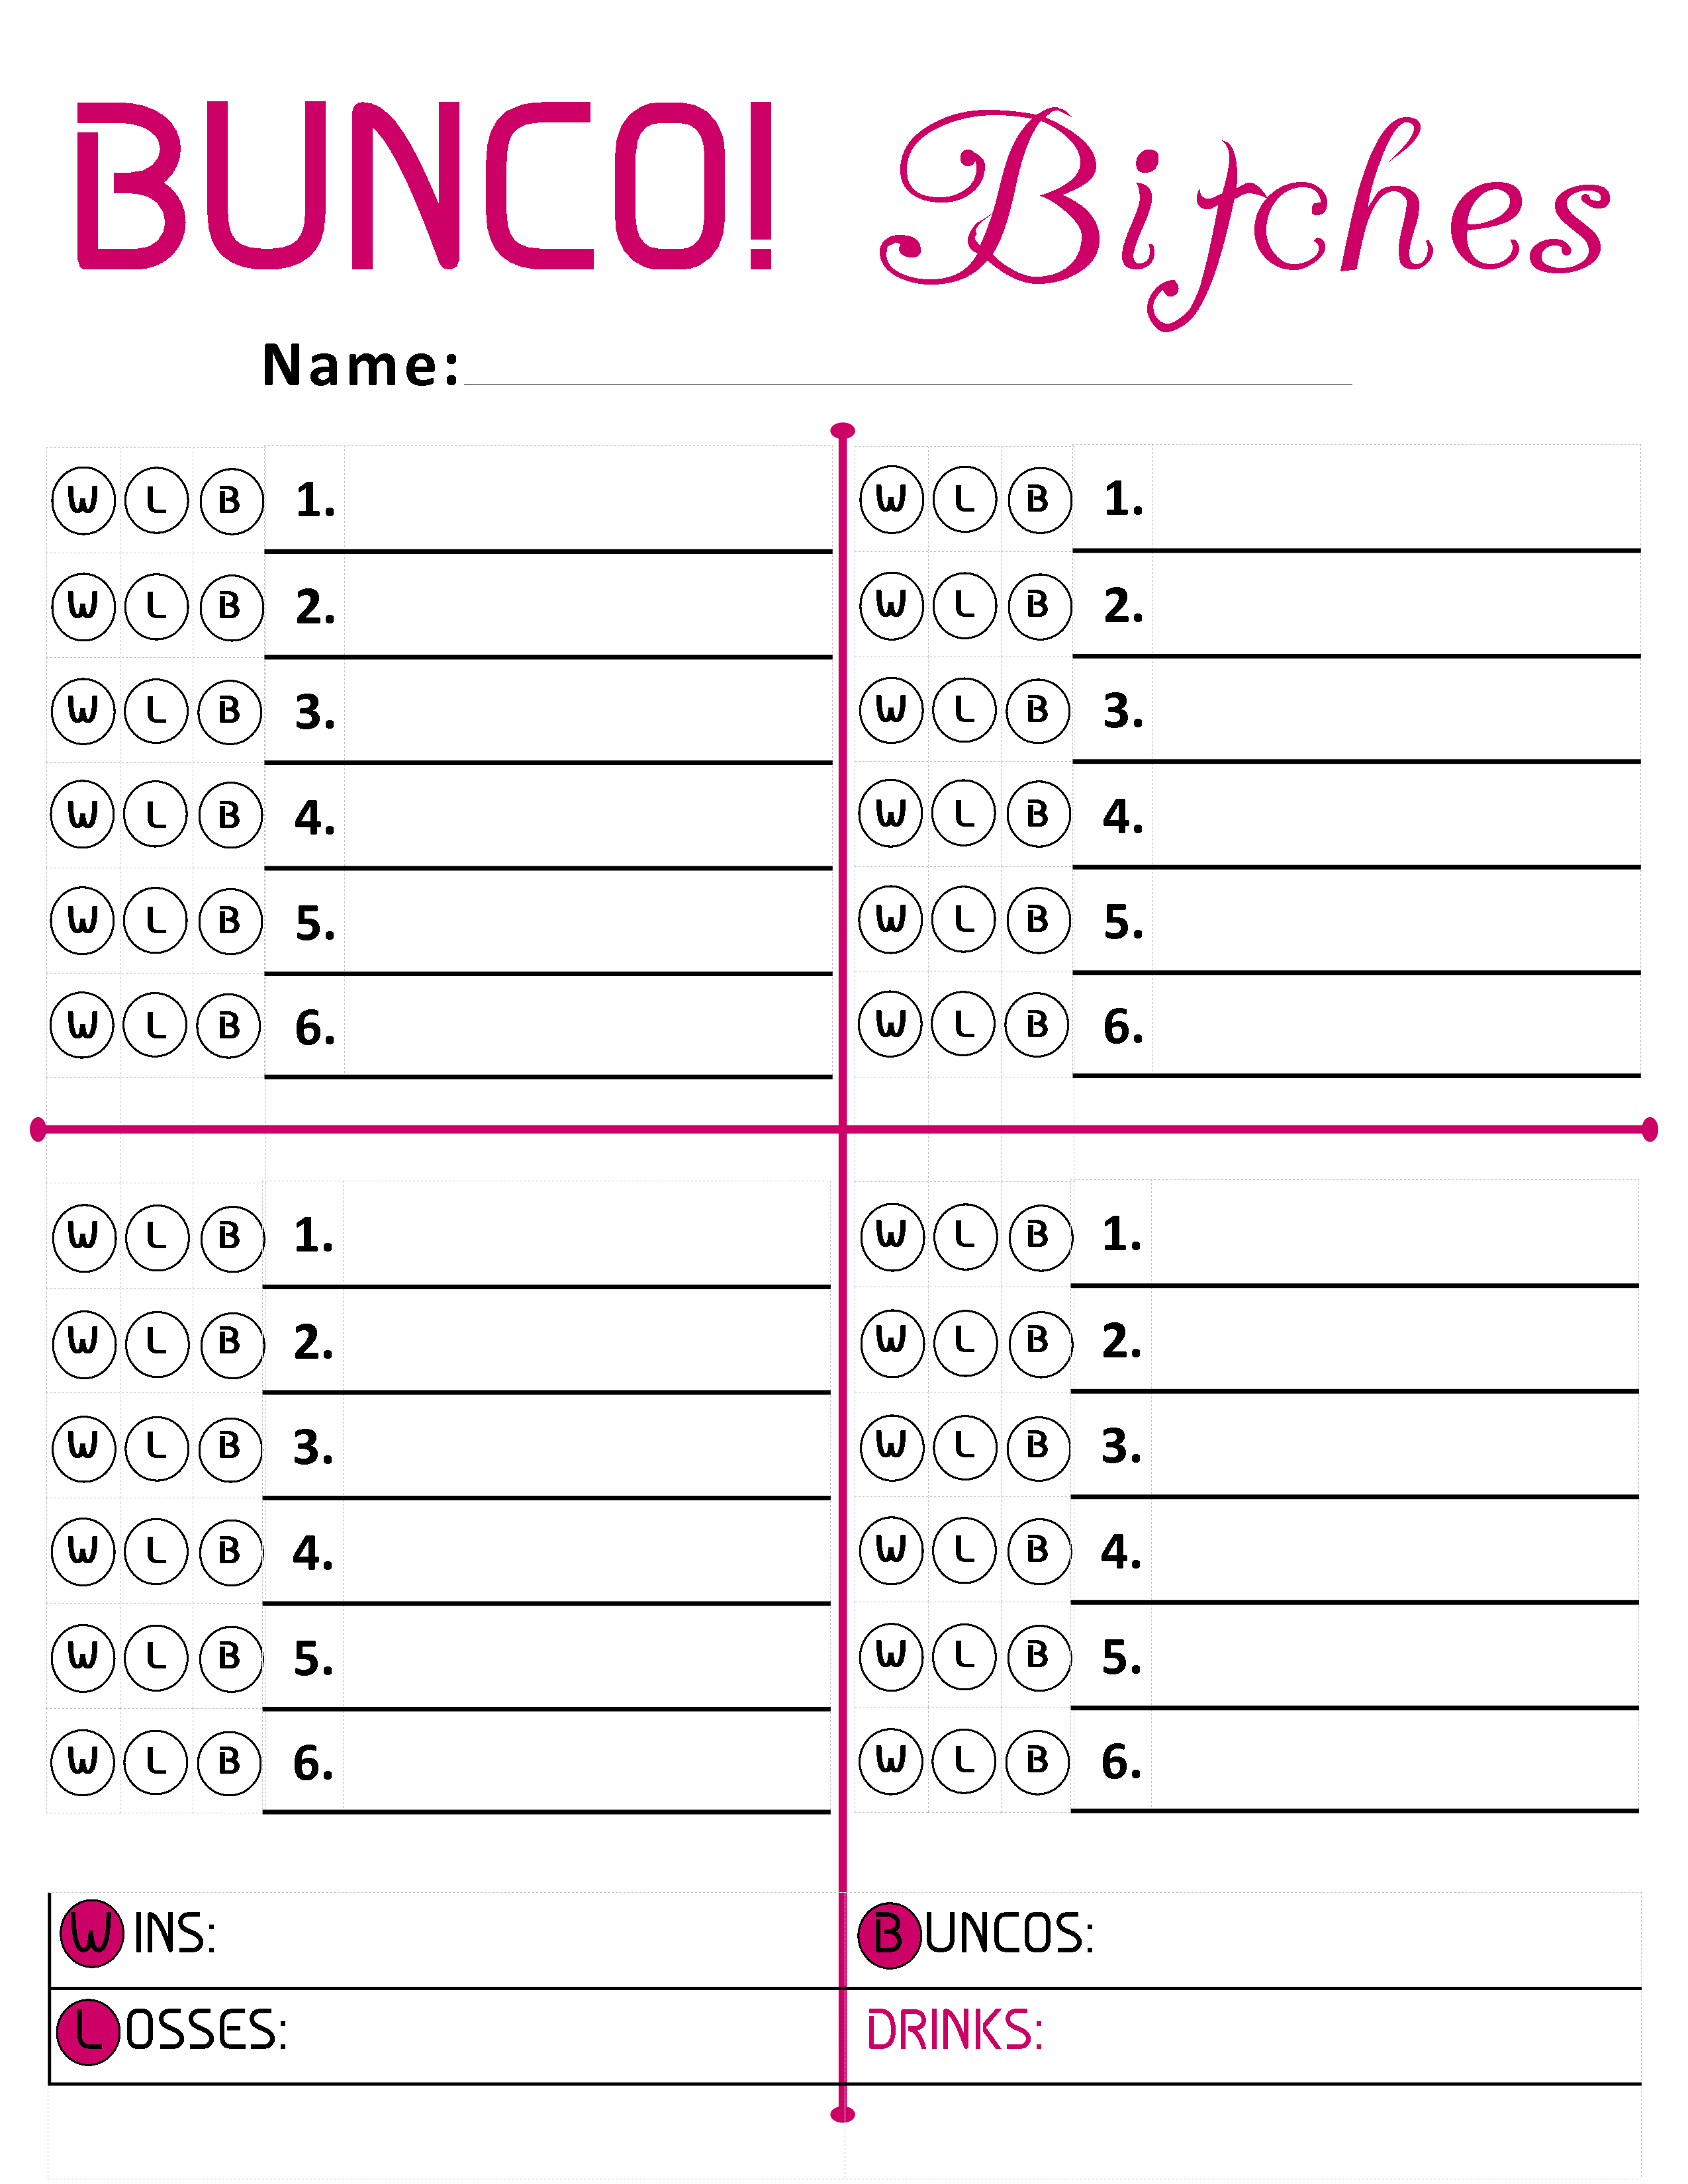 Bunco Score Card In Printable Png Format. Bunco! Bitches Including - Free Printable Bunco Game Sheets